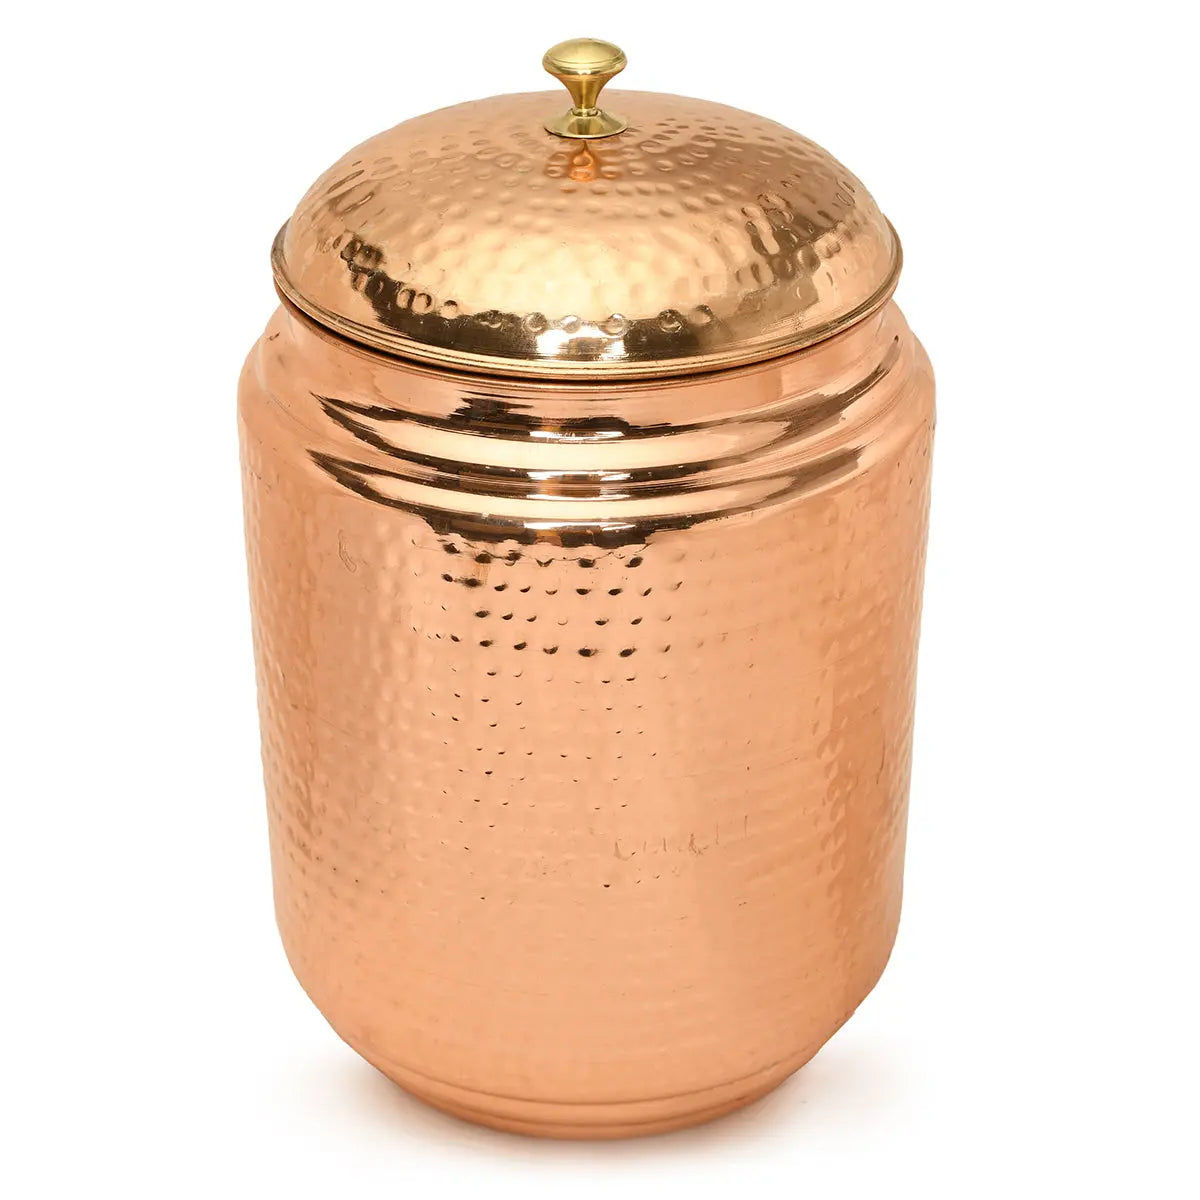 Pure Copper Water Pot Matka Vessel With Stand Hammered Jointless - CROCKERY WALA AND COMPANY 